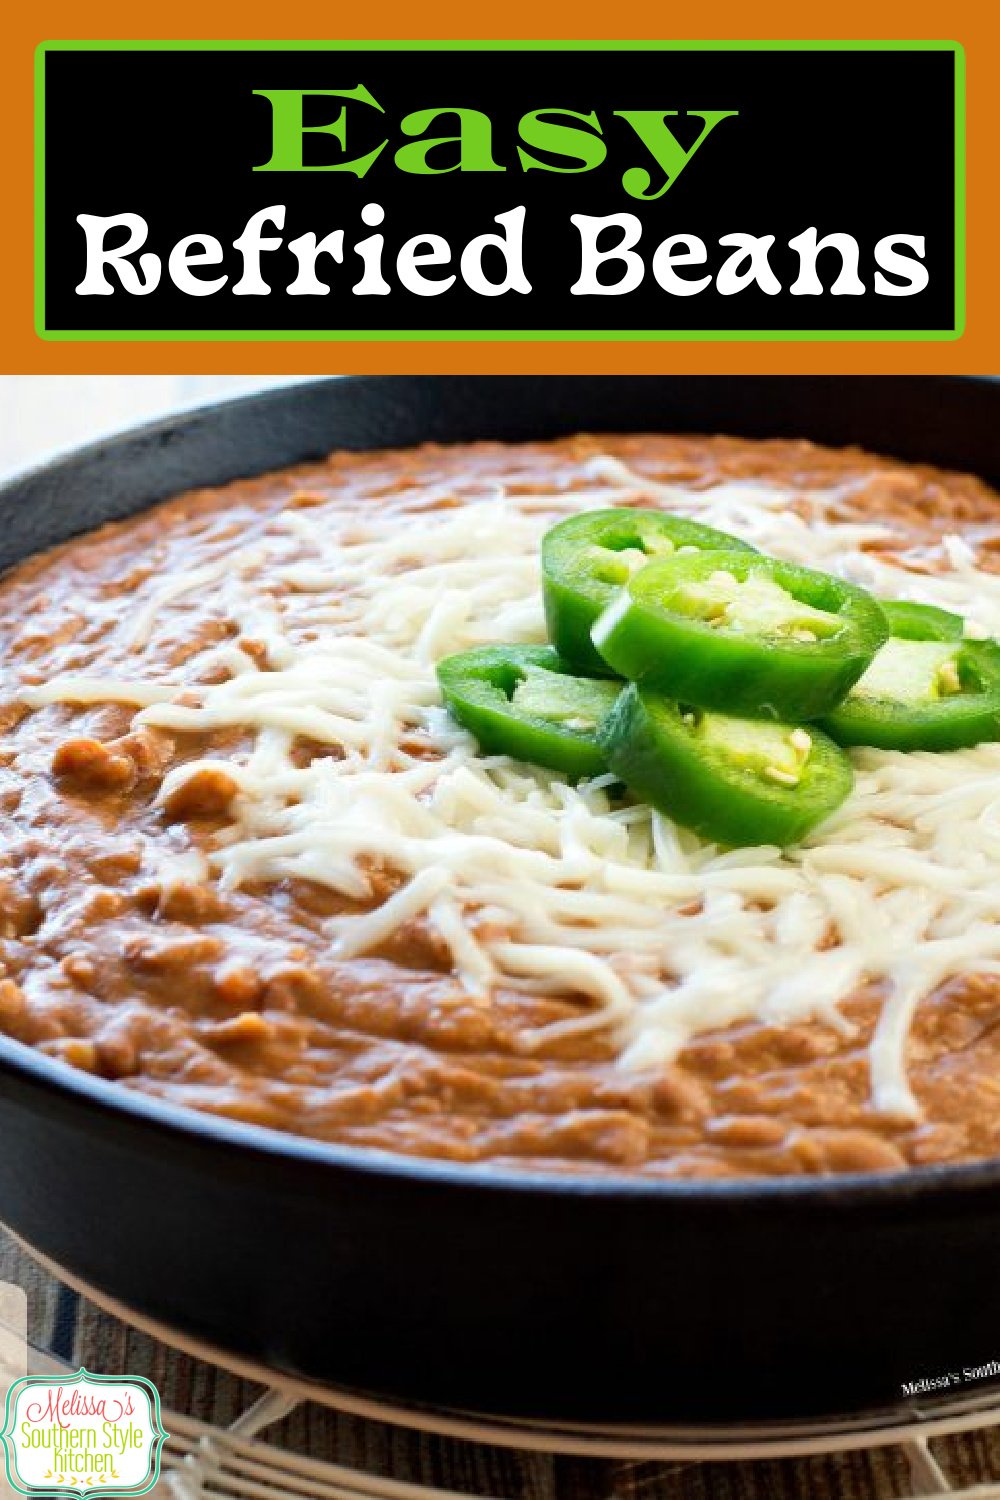 These Easy Refried Beans are packed with flavor #refriedbeans #beans #sidedishideas #dinnerideas #pintobeans #fiestasides #southernfood #southernrecipes via @melissasssk